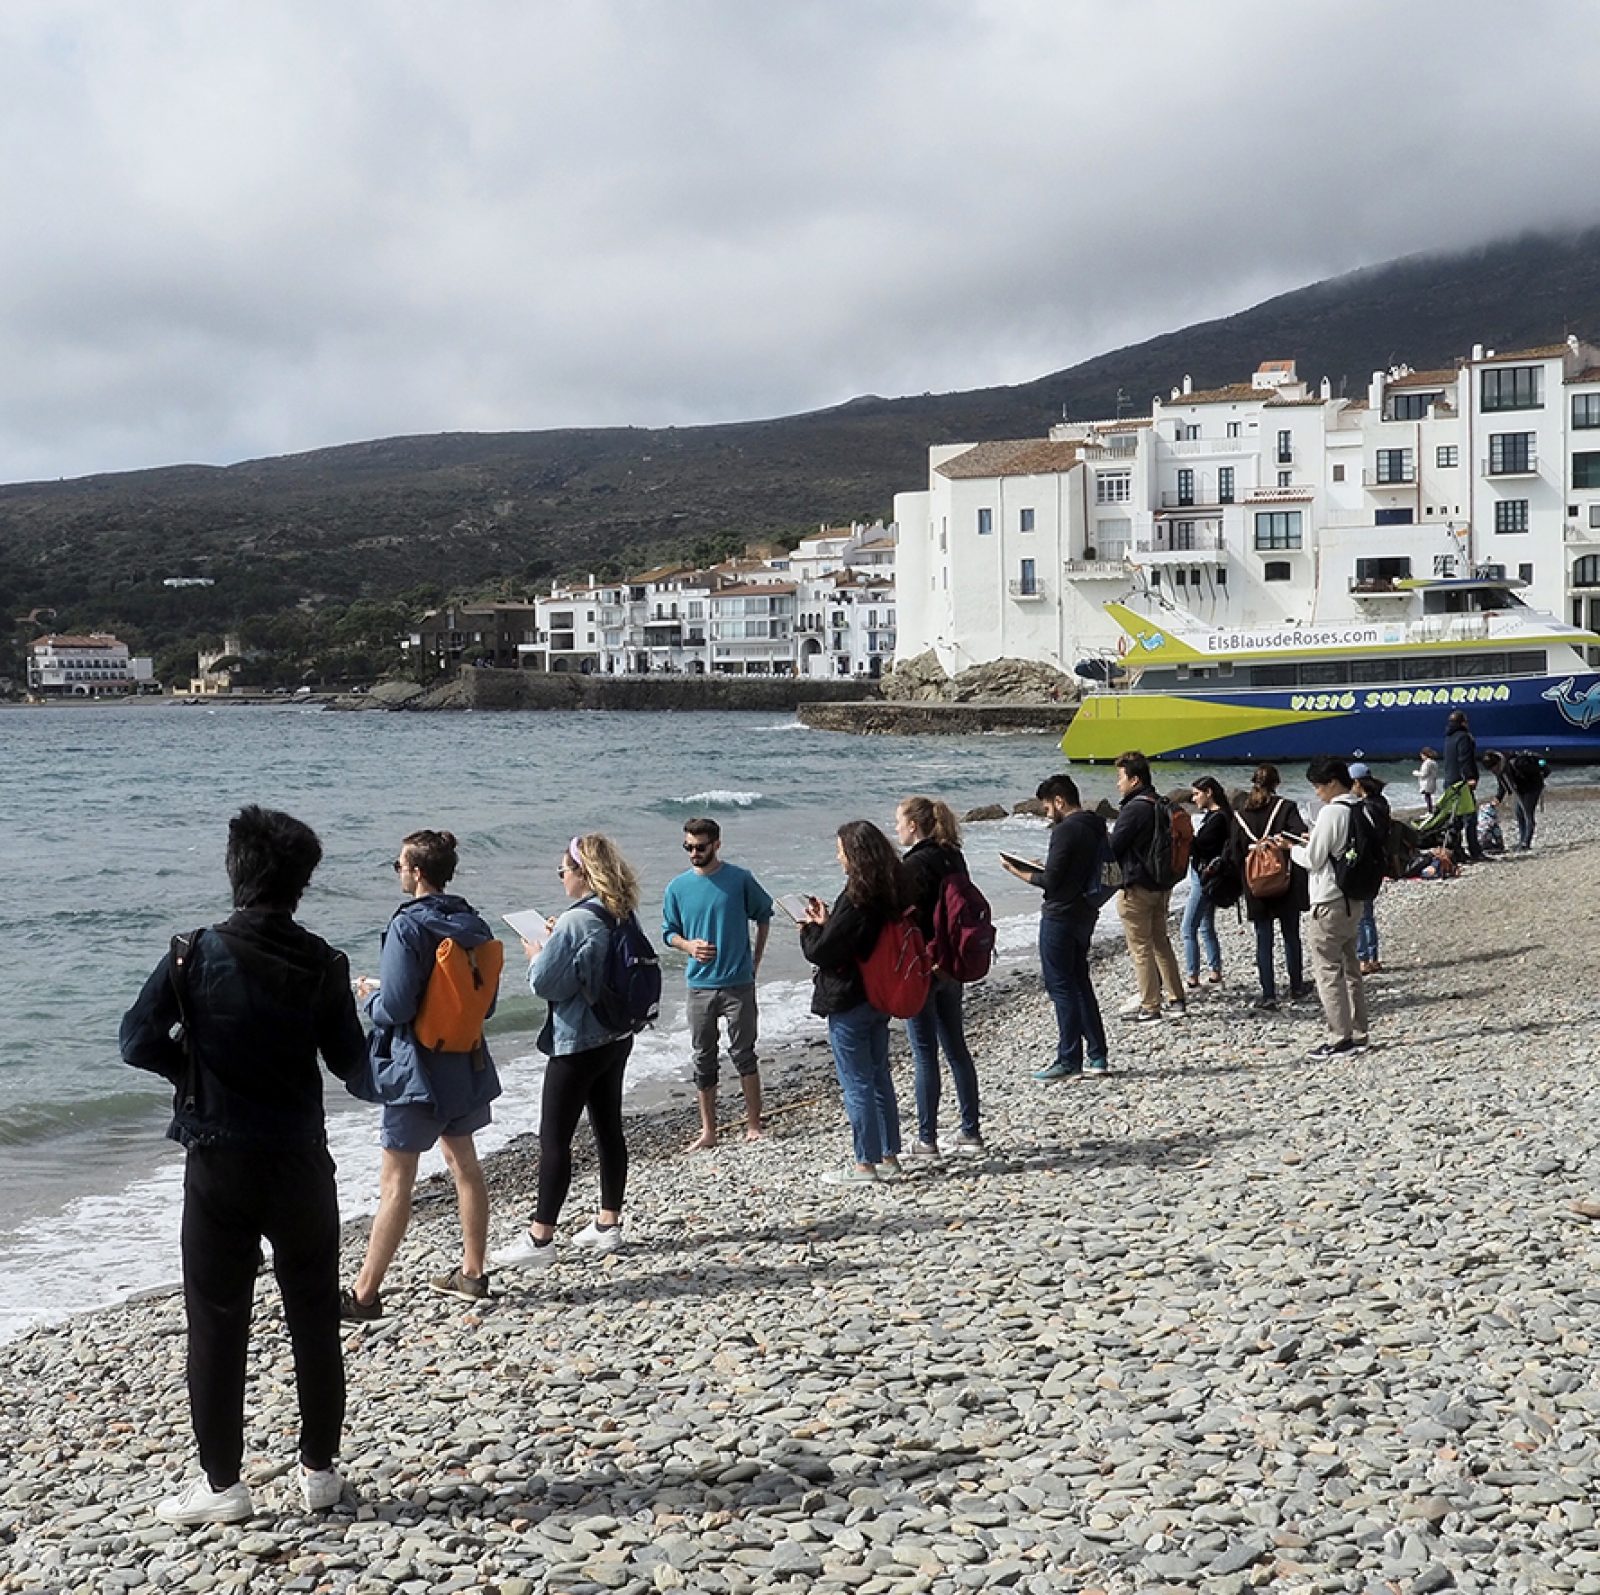 Students sketching outside in Cadaques